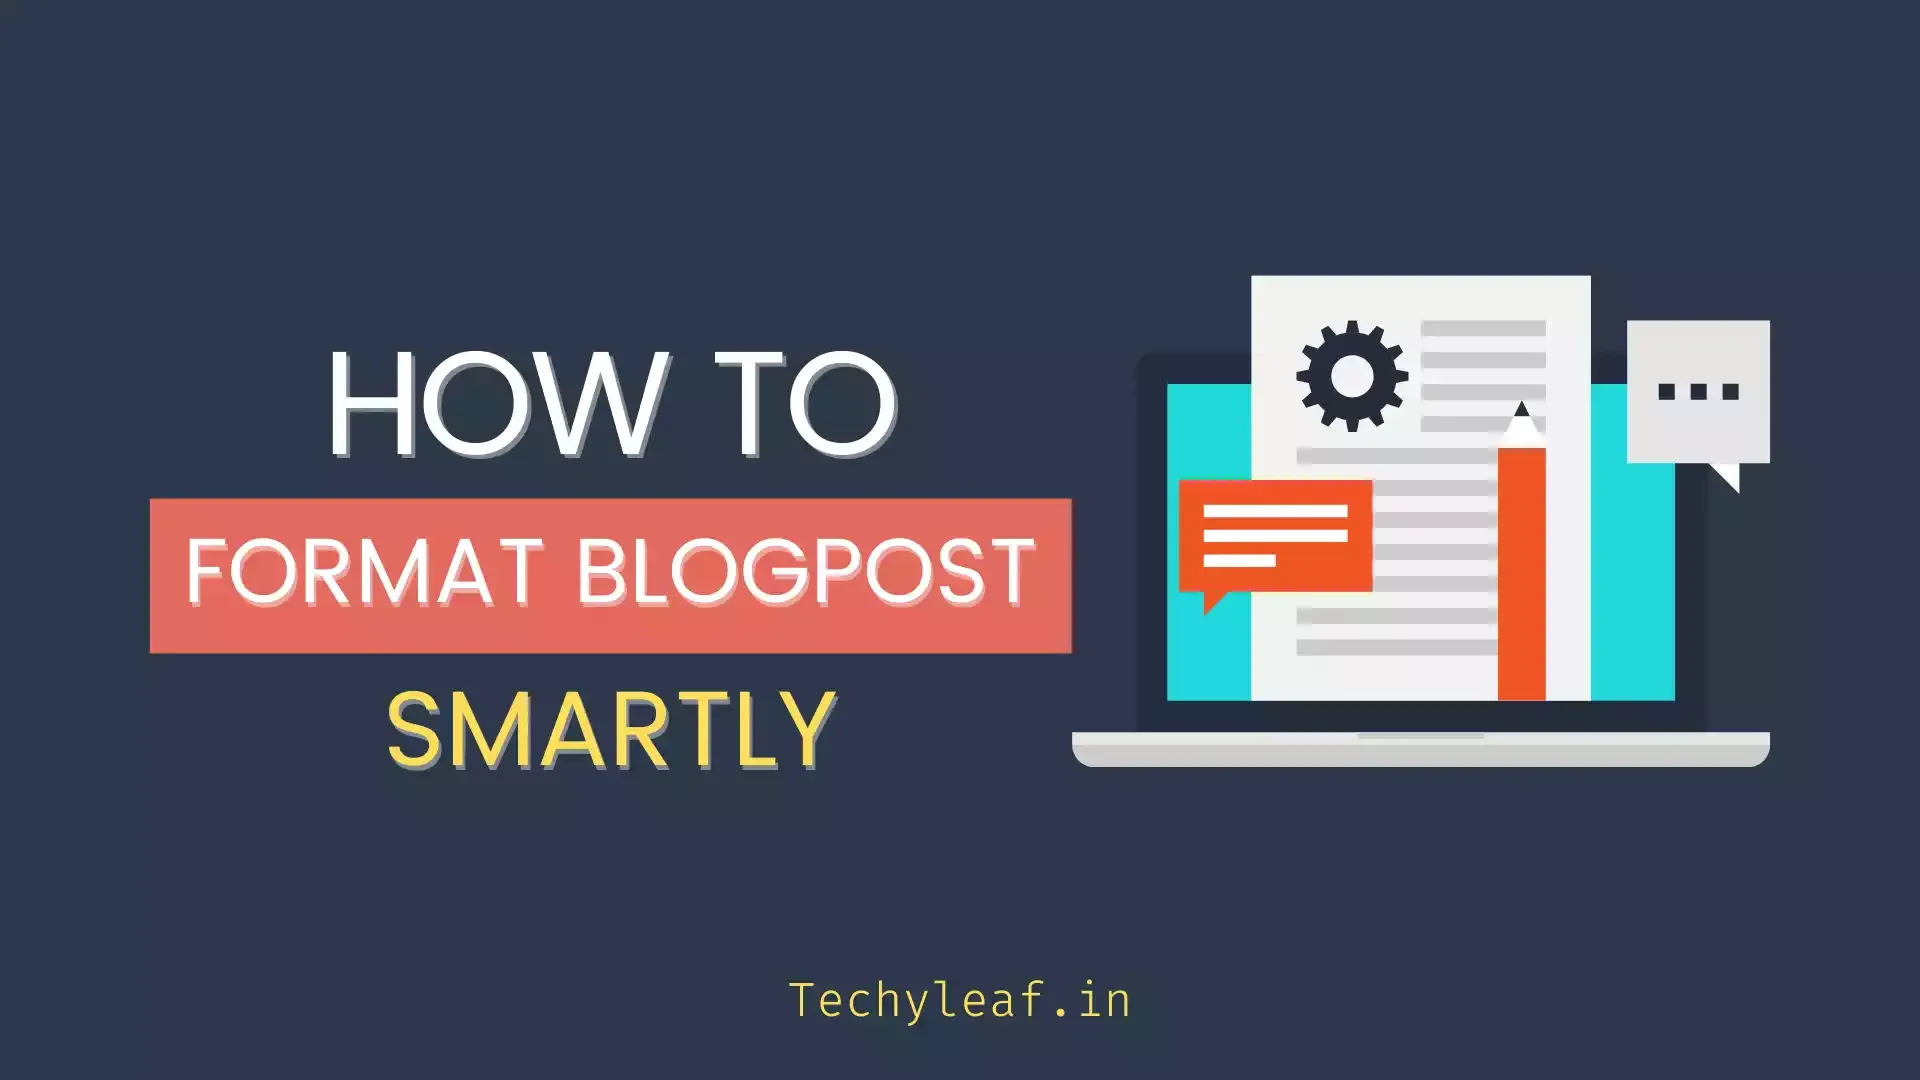 How to format blogpost smartly